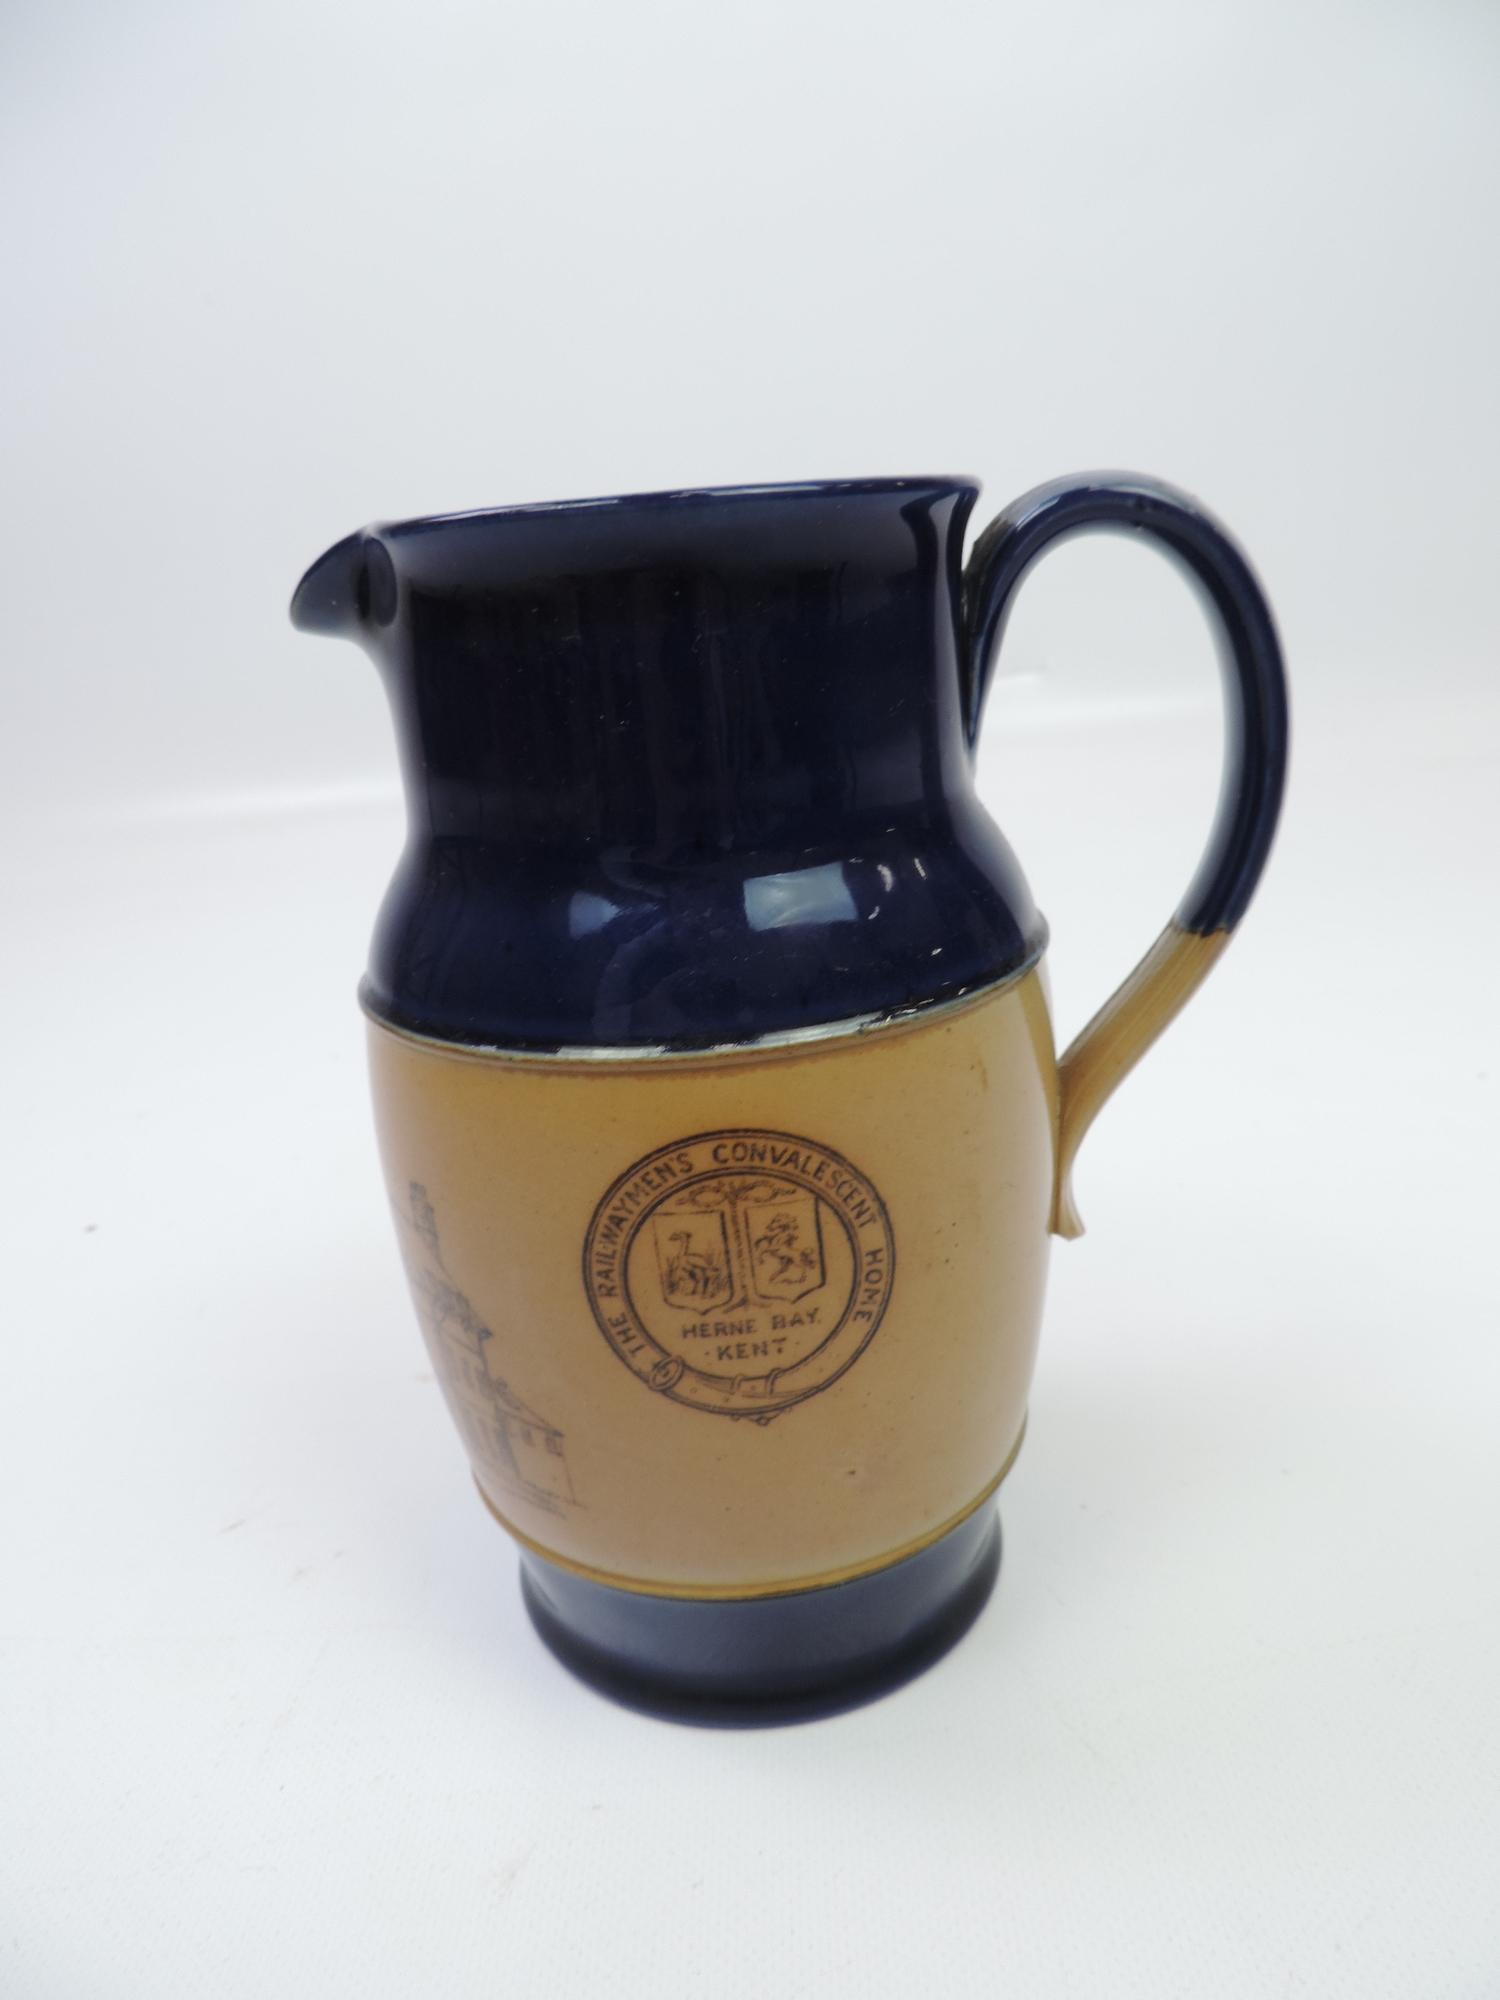 Royal Doulton Salt Glaze Stoneware Jug Made for the Railwayman’s Convalescent Home in Herne Bay,